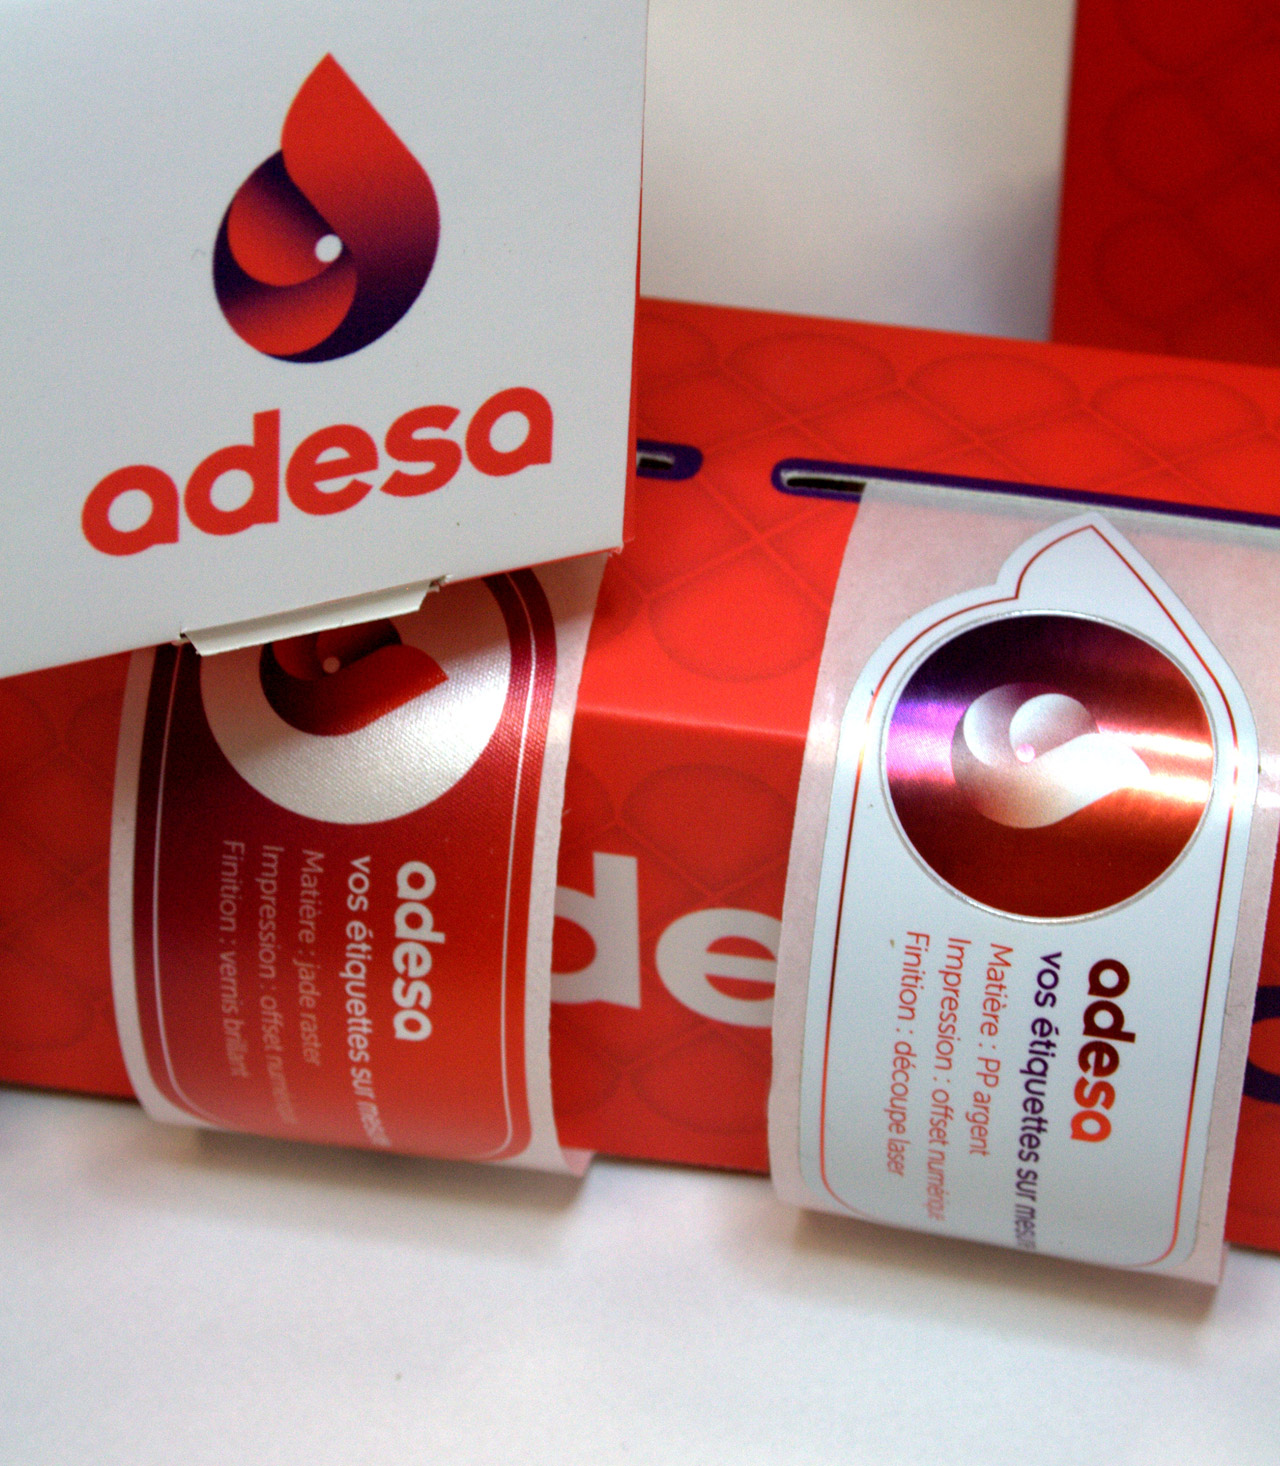 adesa-packaging-adesabox-situation-3-creation-communication-caconcept-alexis-cretin-graphiste